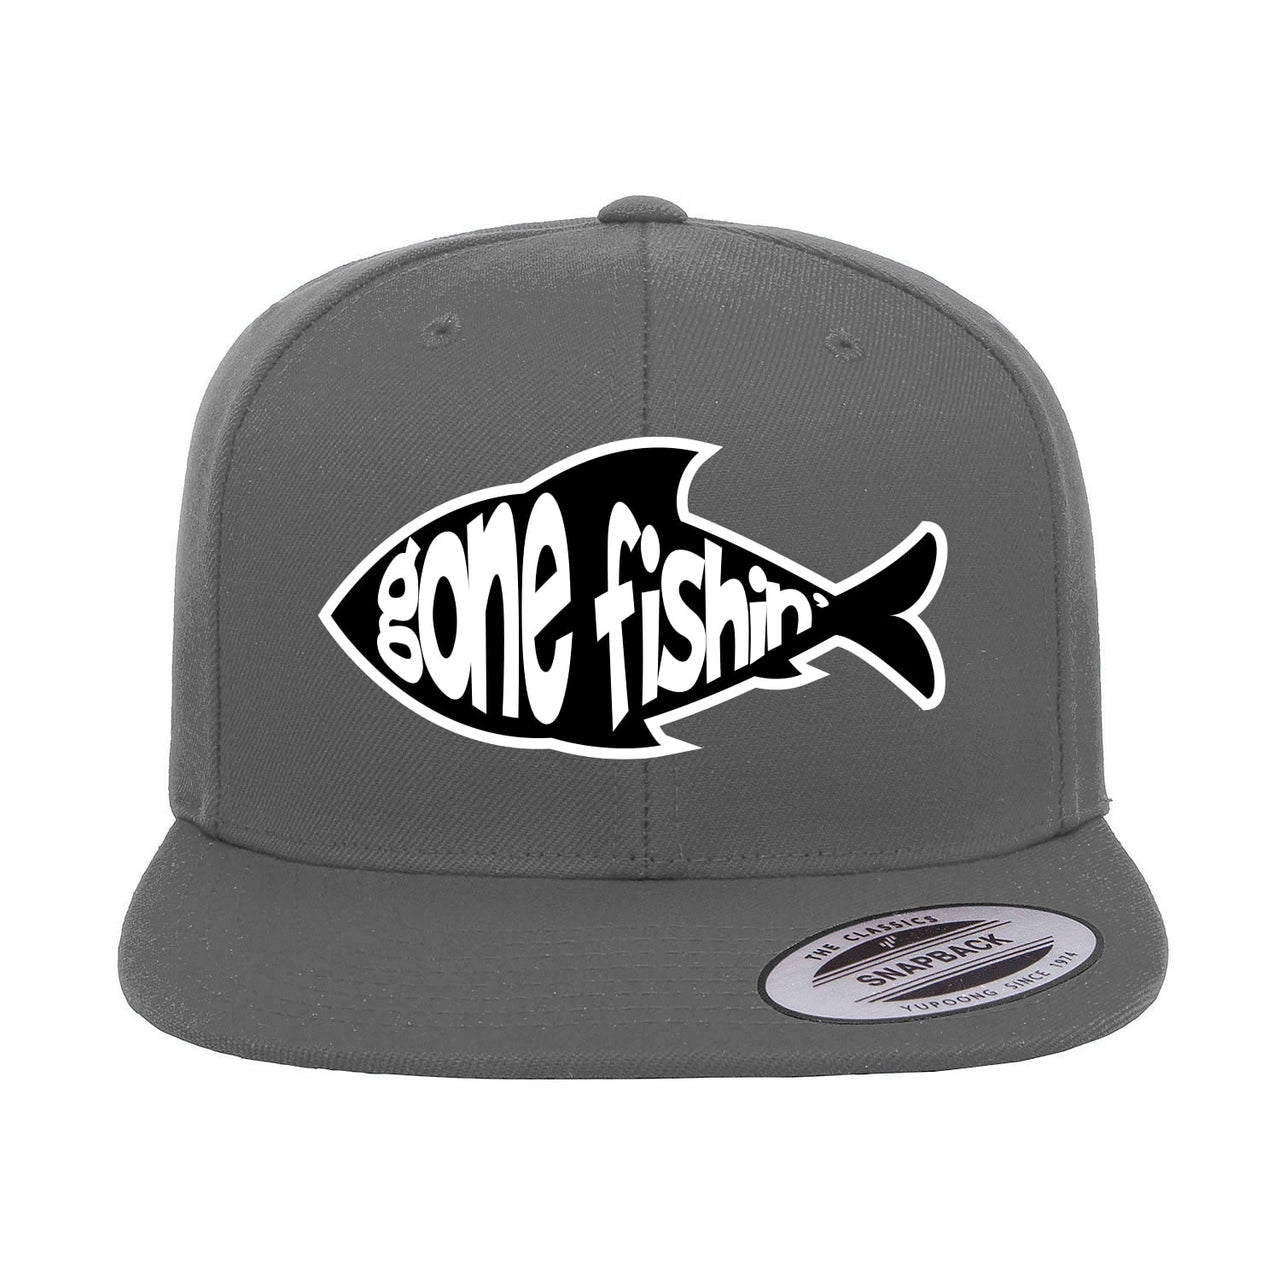 Gone Fishing Embroidered Flat Bill Cap